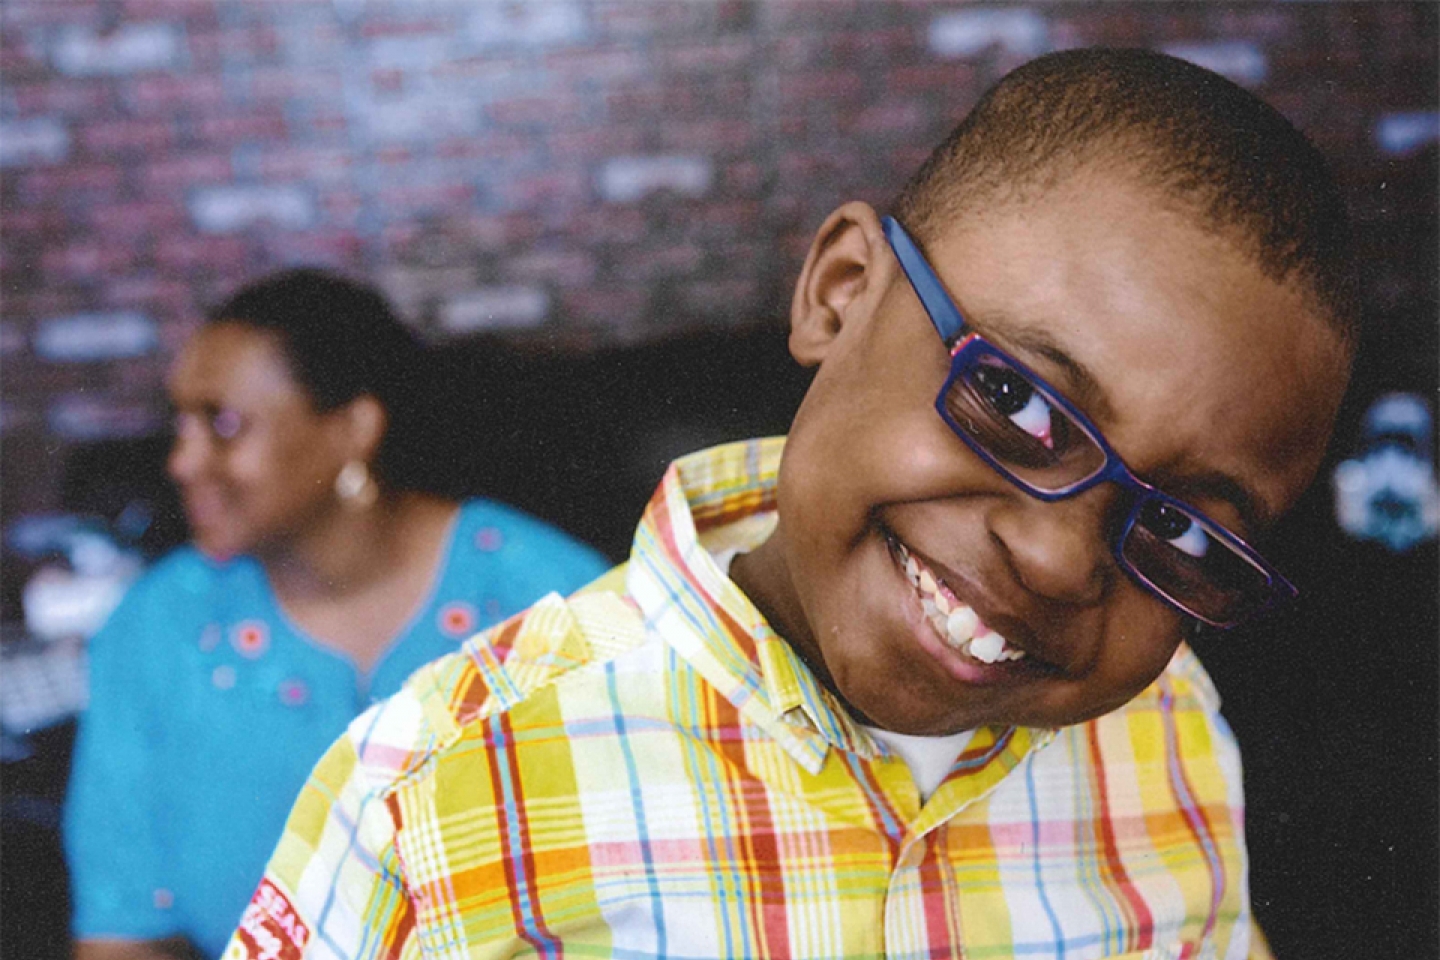 Portrait of Evan, who received a kidney transplant at Weill Cornell Medicine